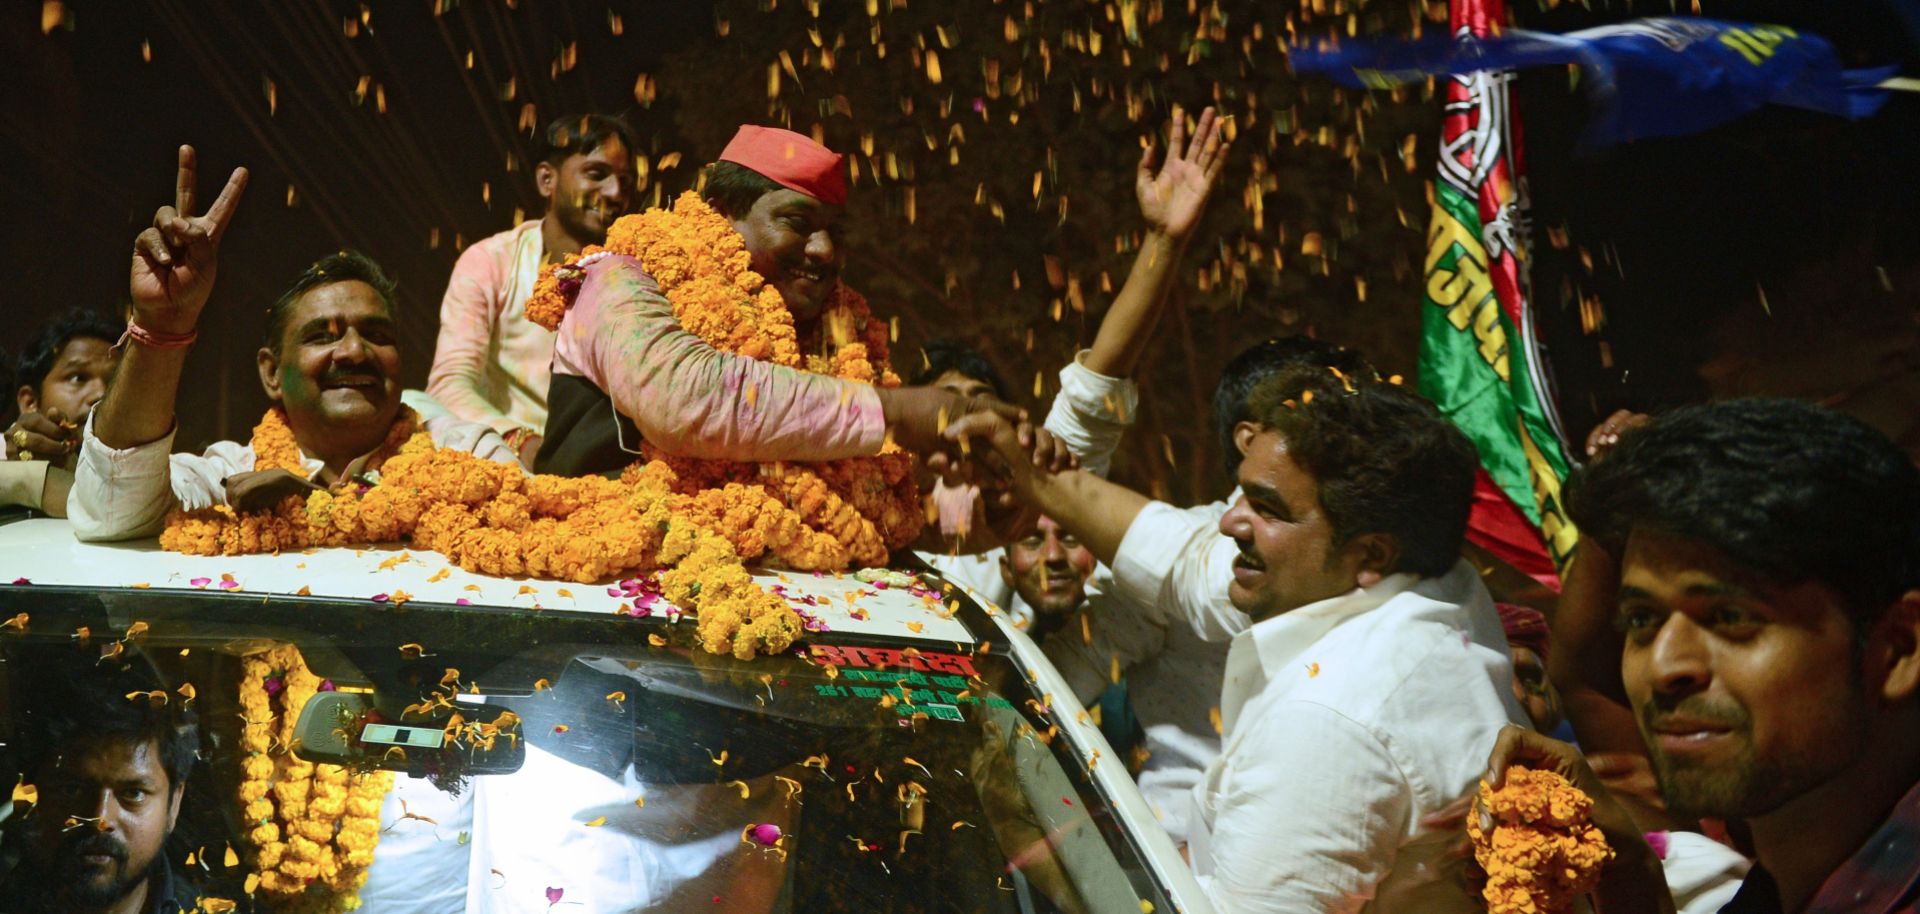 Samajwadi Party candidate Nagendra Pratap Singh Patel, center, celebrates with supporters in Allahabad after winning election to India's lower house of Parliament on March 14, 2018.